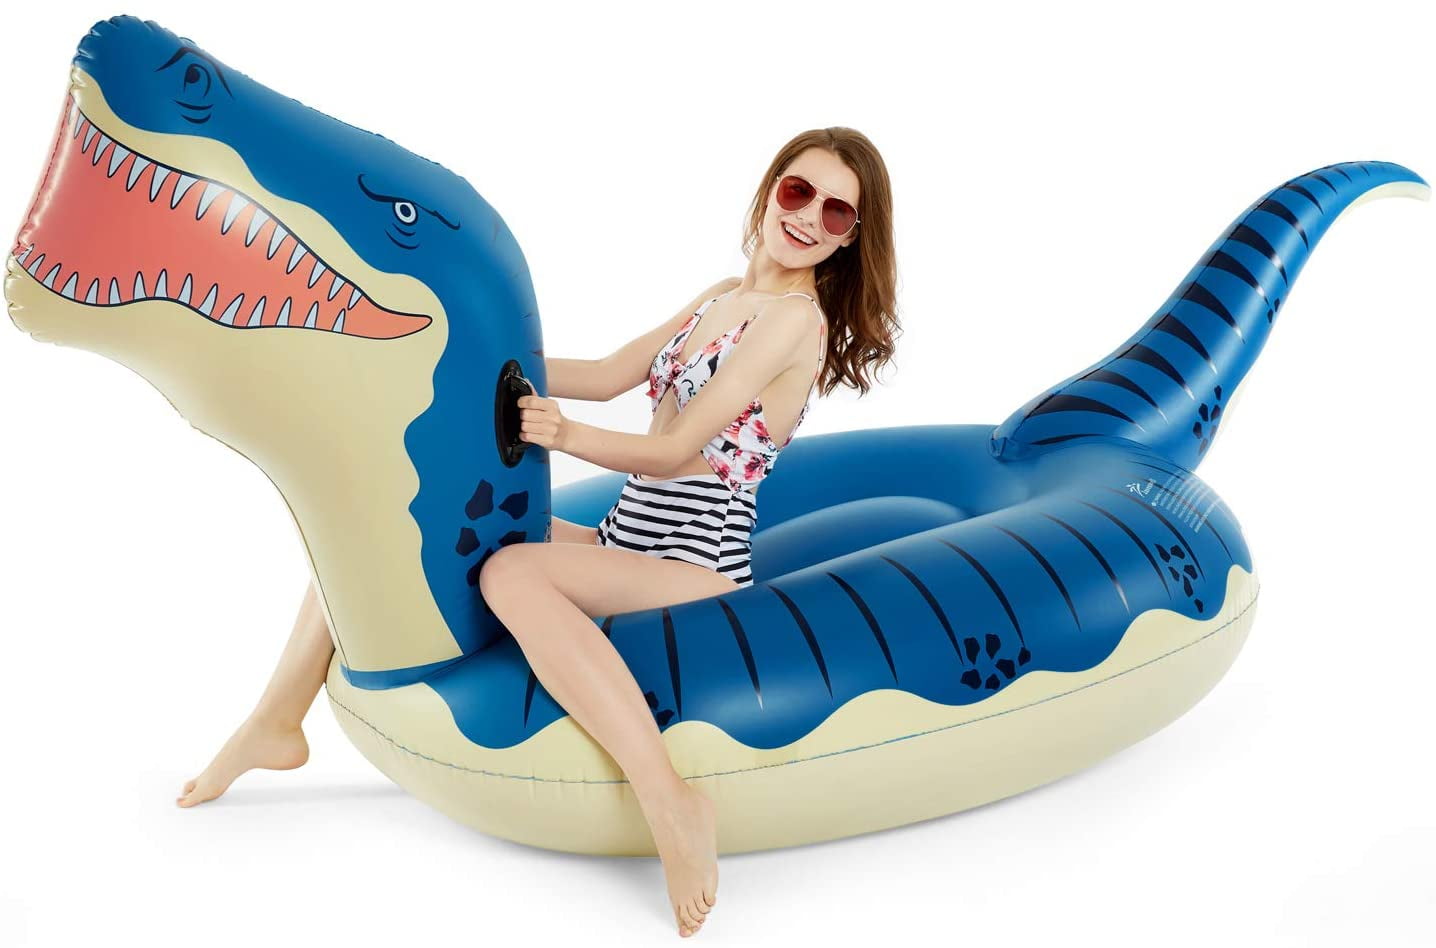 Kids Inflatable Toy Blow Up Dinosaurs Dress Up Party Swim Pool Beach Party Favor 